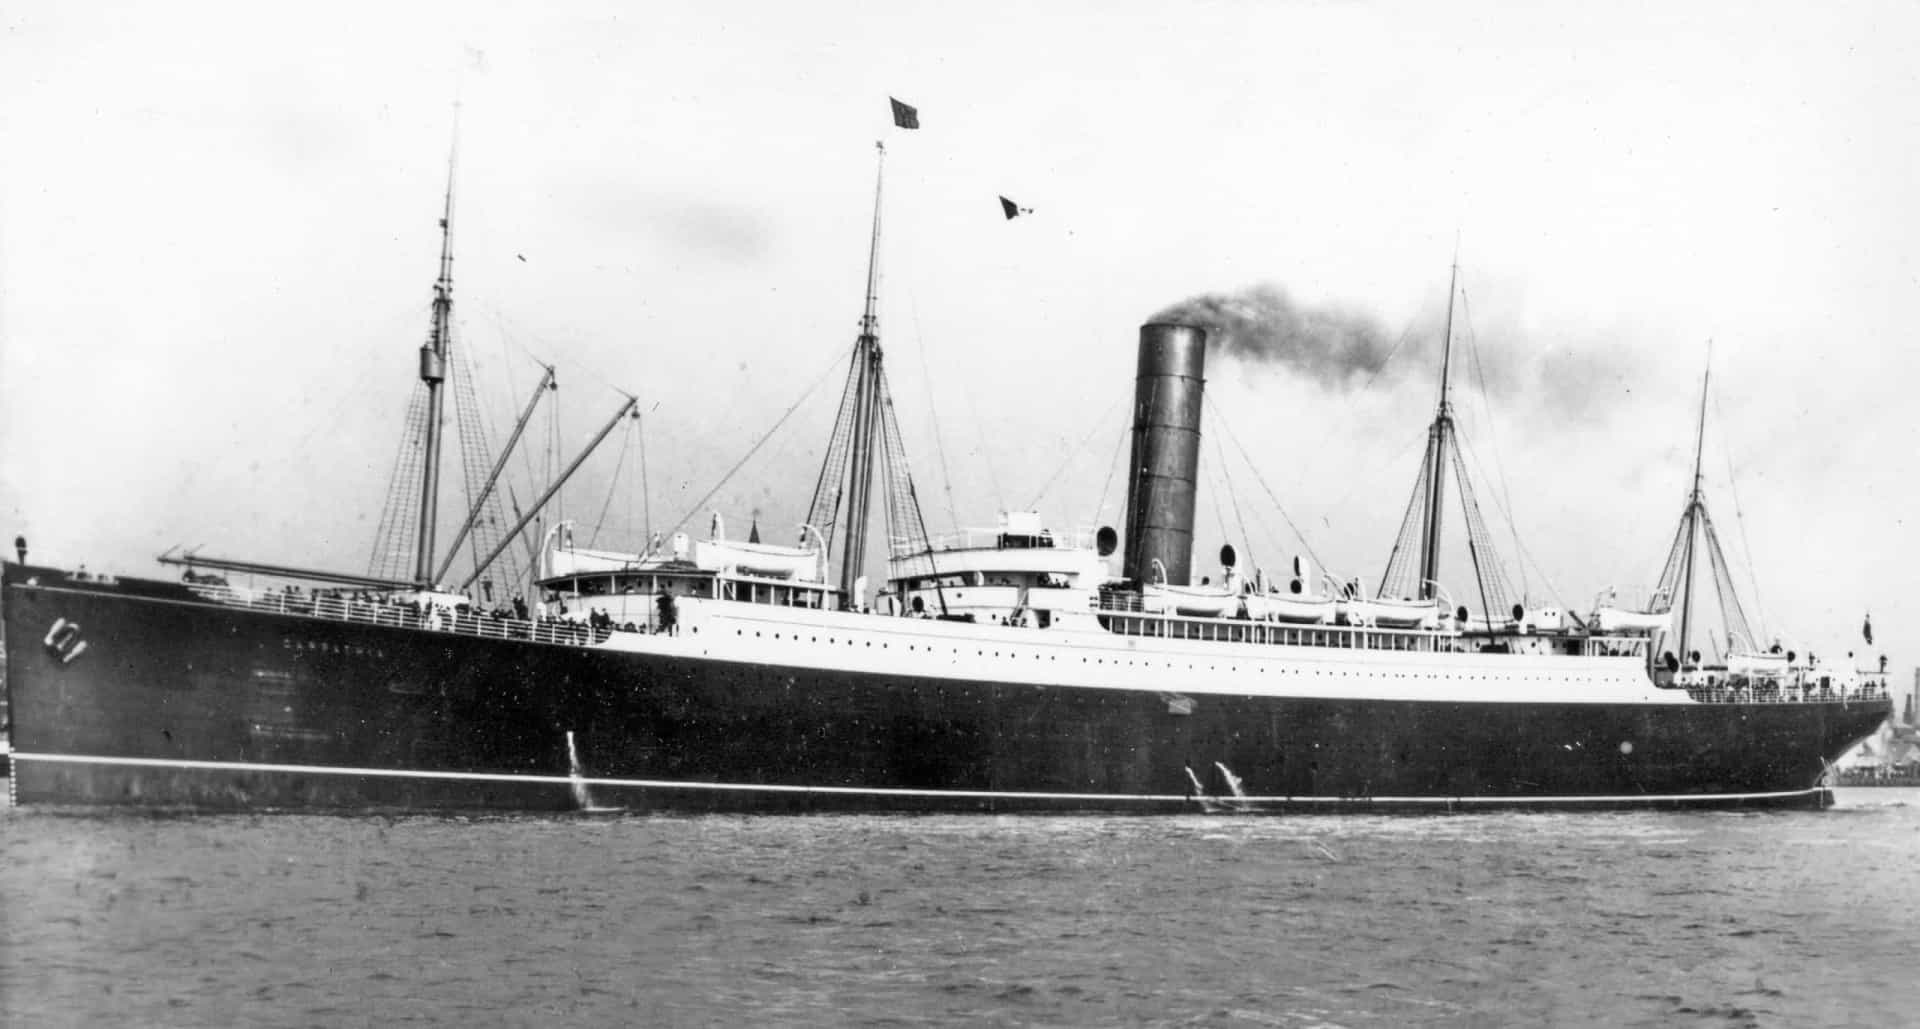 <p>Another Cunard transatlantic passenger steamship, RMS <em>Carpathia</em> found fame for different reasons. This is the vessel that sailed to the assistance of the stricken RMS <em>Titanic</em> in April 1912, with the crew rescuing 705 survivors from the sunken ship's lifeboats.</p><p><a href="https://www.msn.com/en-za/community/channel/vid-7xx8mnucu55yw63we9va2gwr7uihbxwc68fxqp25x6tg4ftibpra?cvid=94631541bc0f4f89bfd59158d696ad7e">Follow us and access great exclusive content every day</a></p>